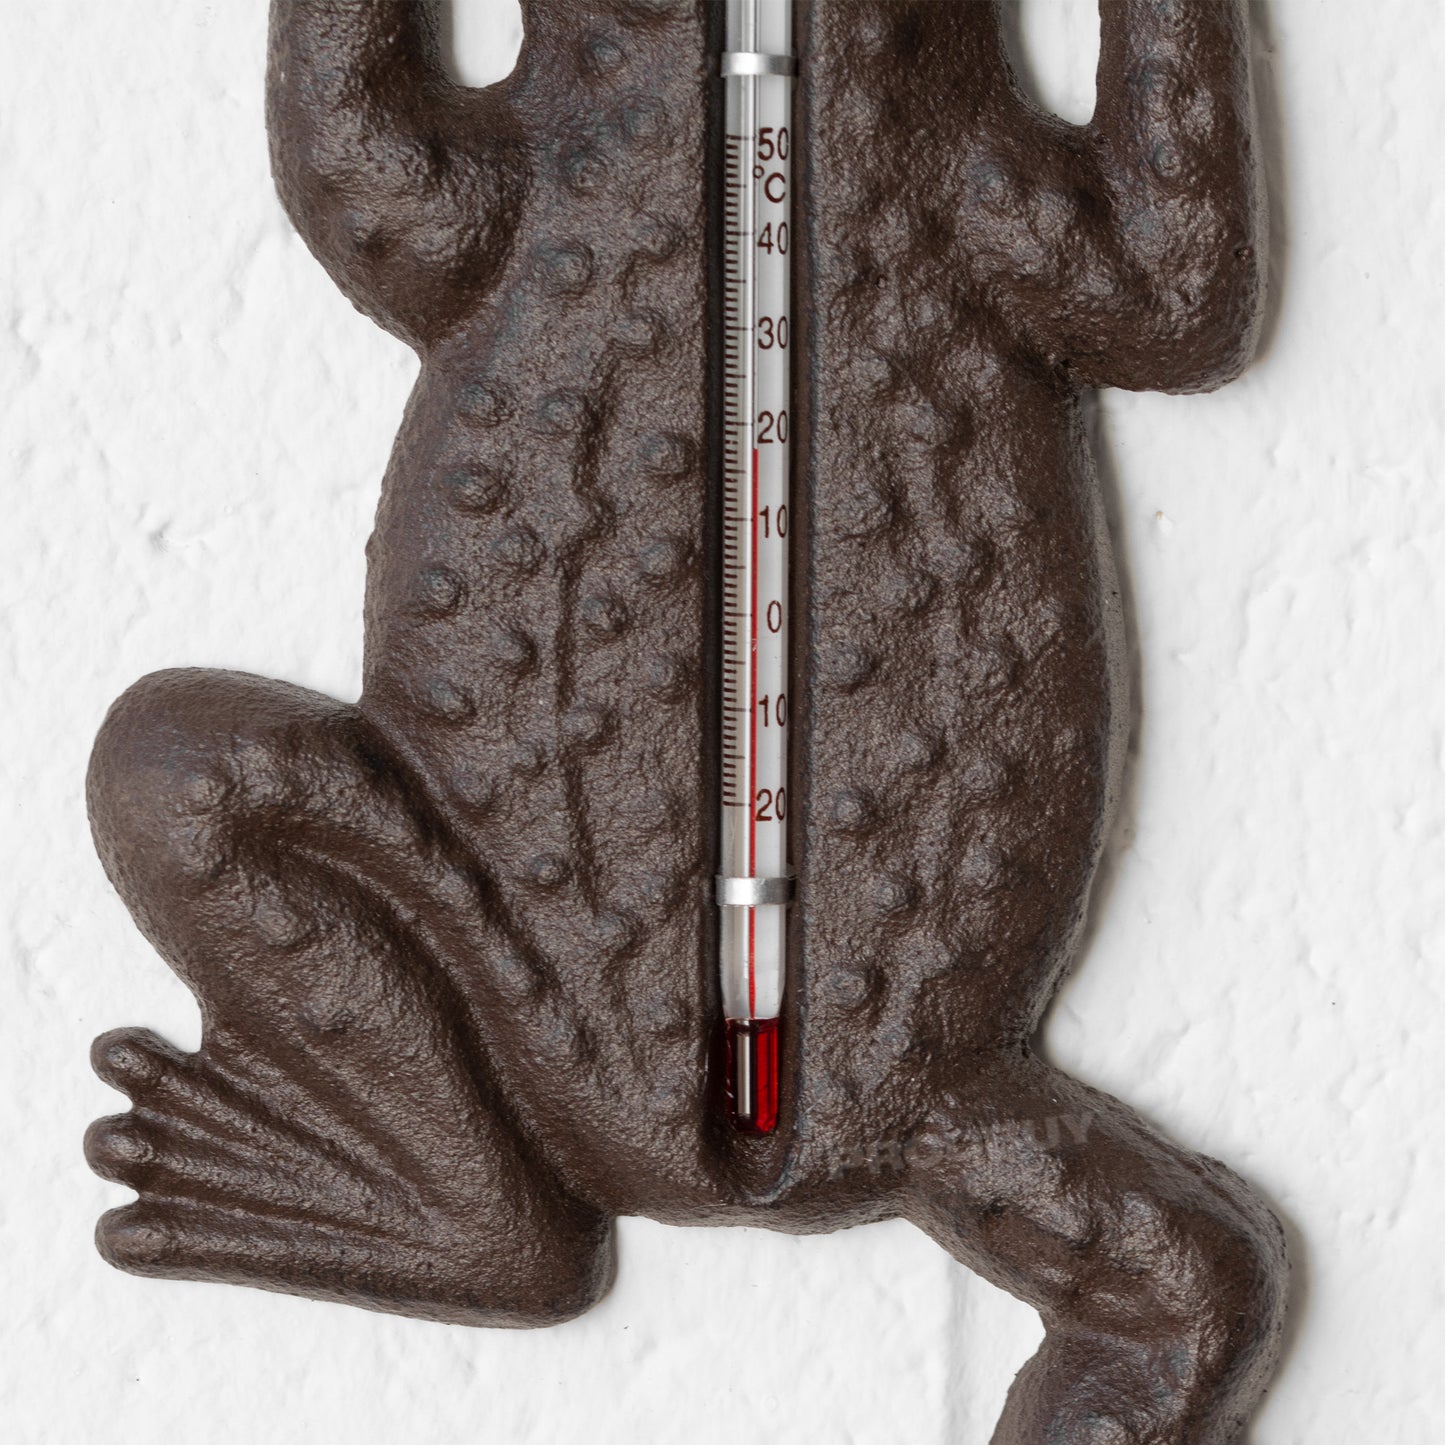 Cast Iron Frog Garden Wall Thermometer